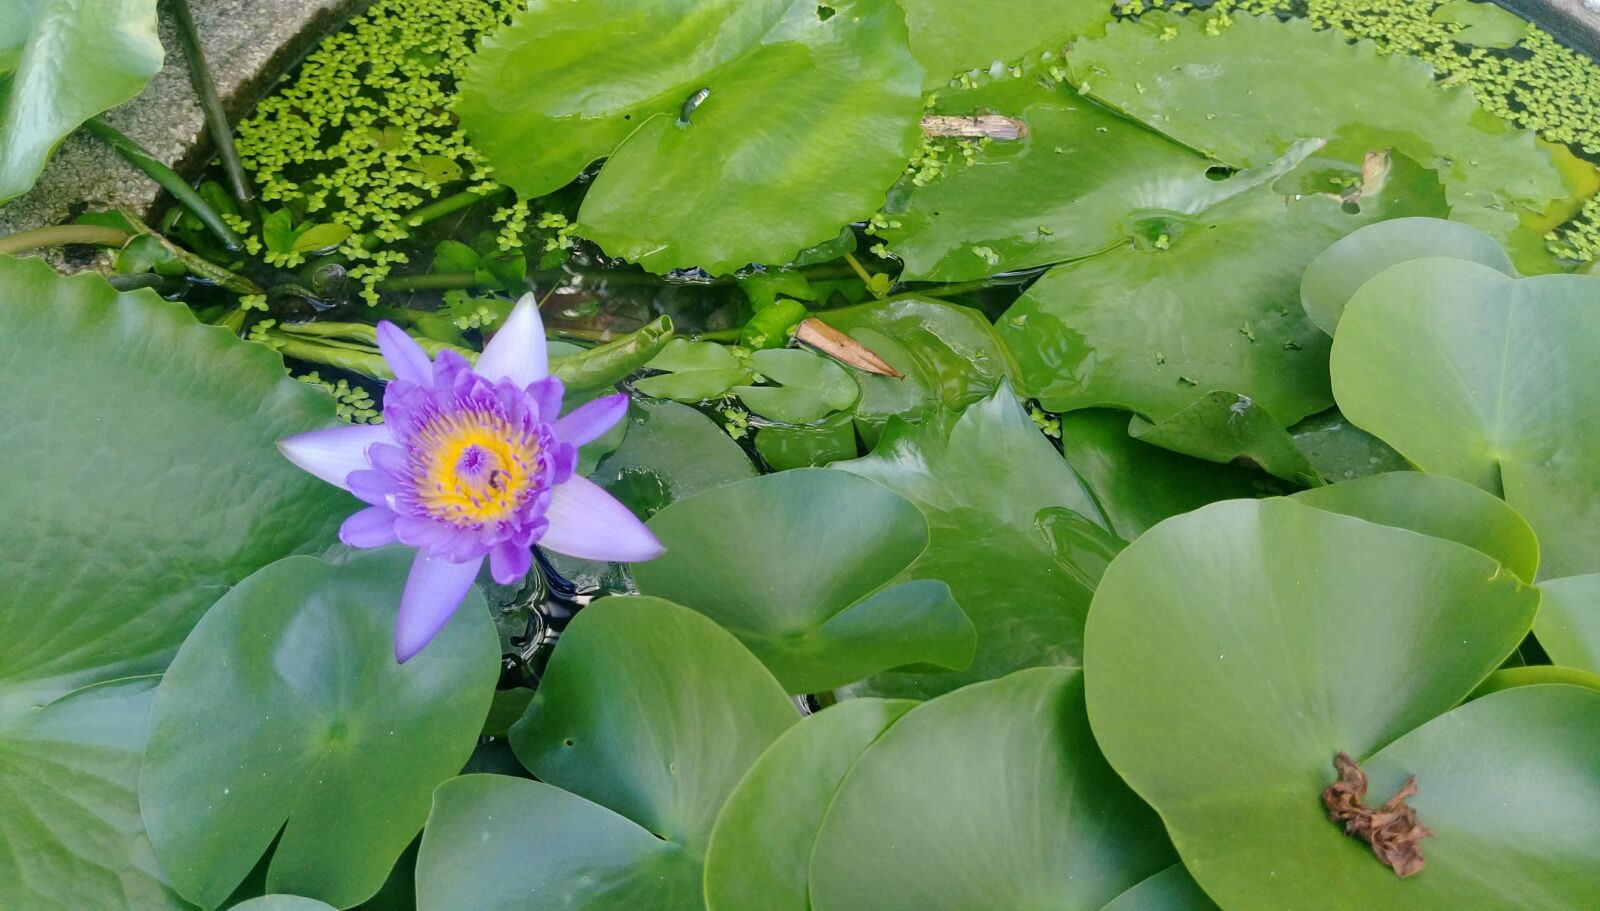 HTC ONE X9 DUAL SIM sample photo. Lotus, clear the net photography